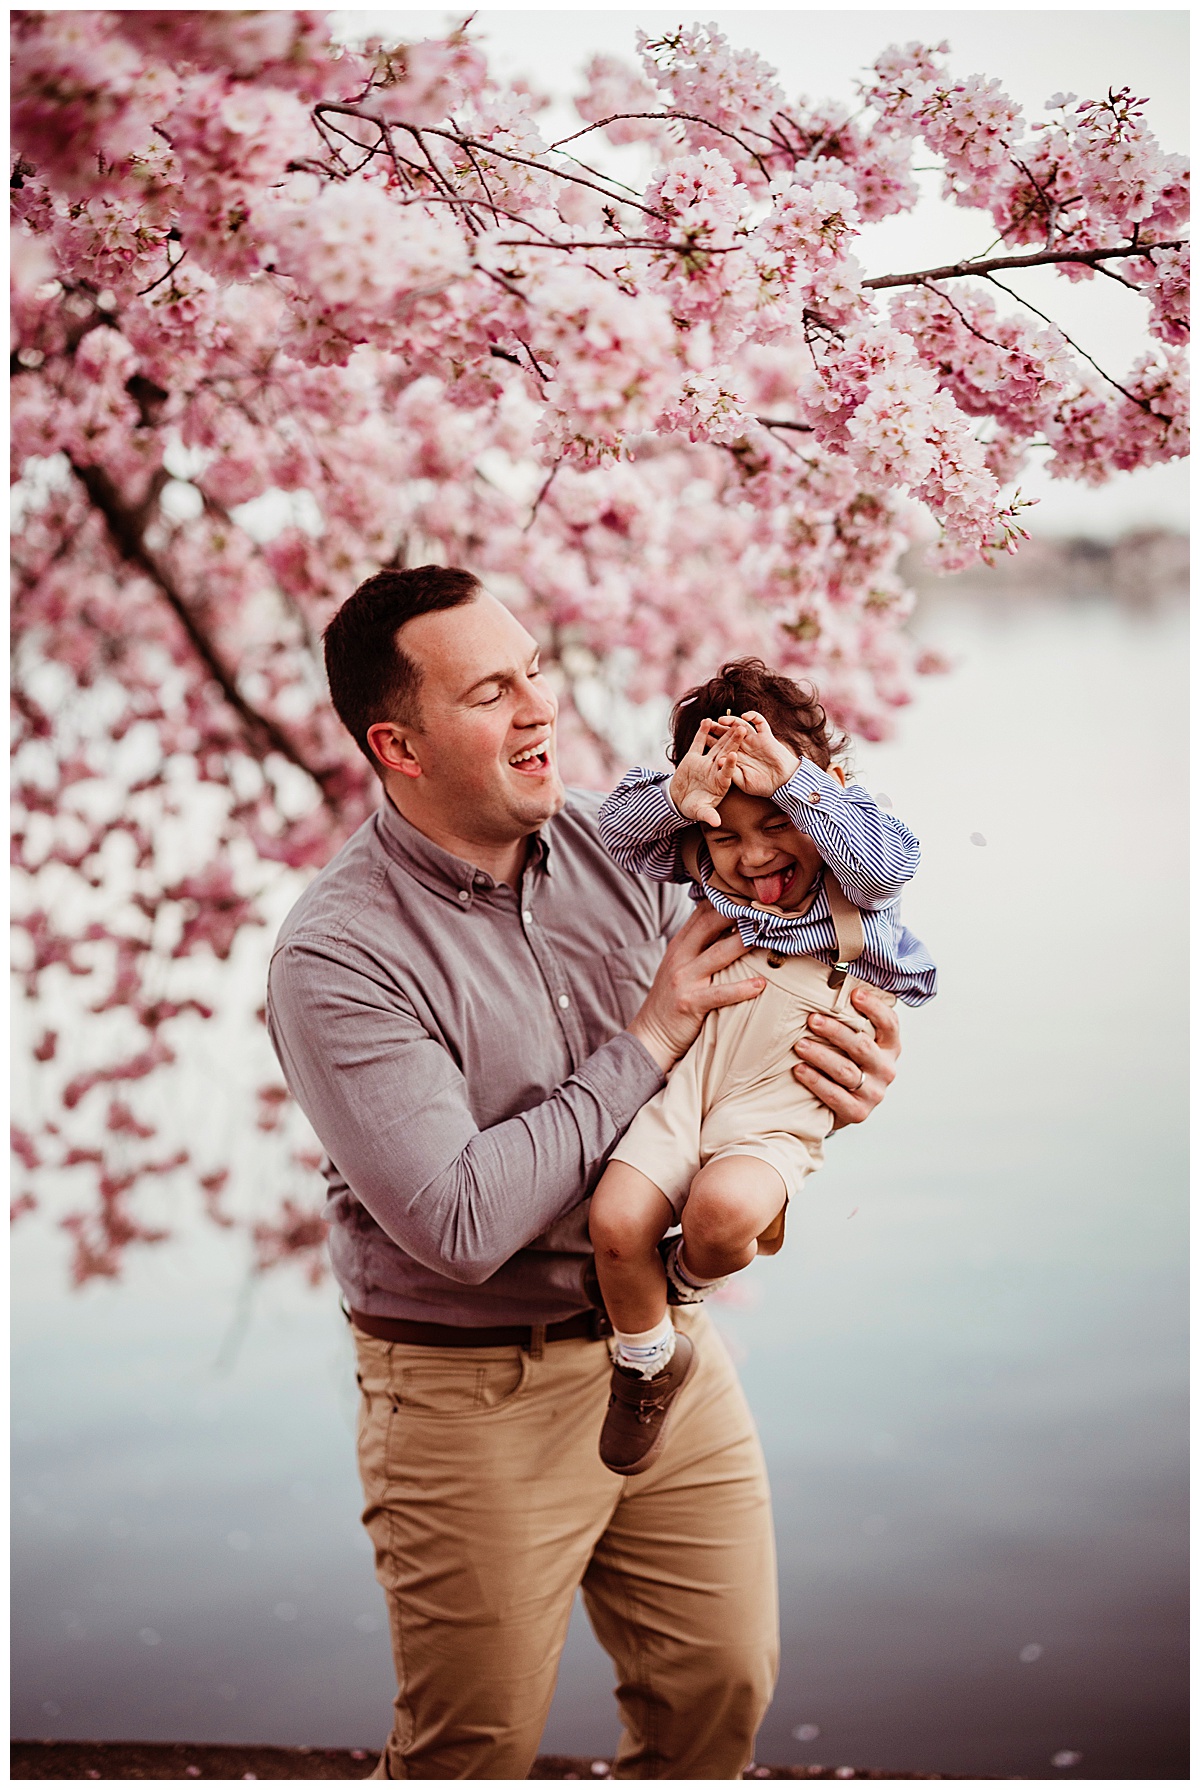 Dad plays with sone during their Washington, DC, Cherry Blossom photos